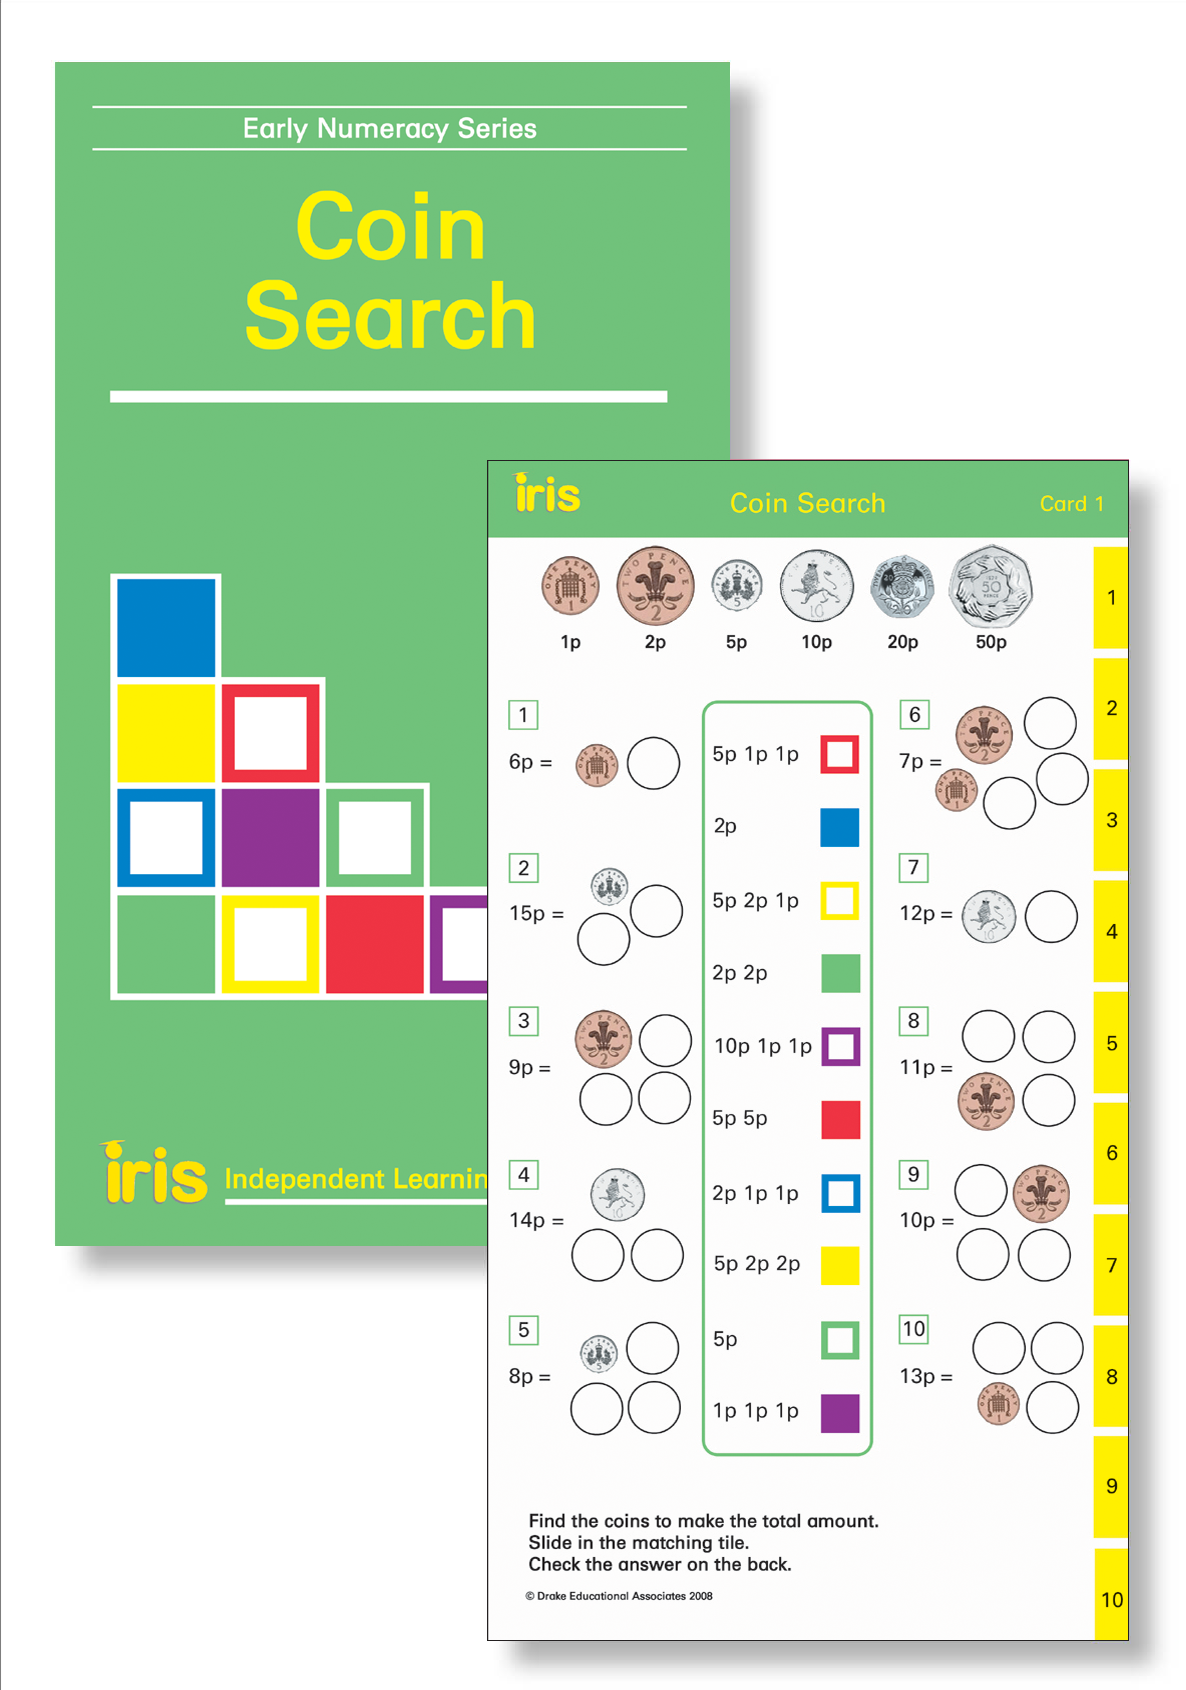 Iris Study Cards: Early Numeracy Year 2 - Coin Search